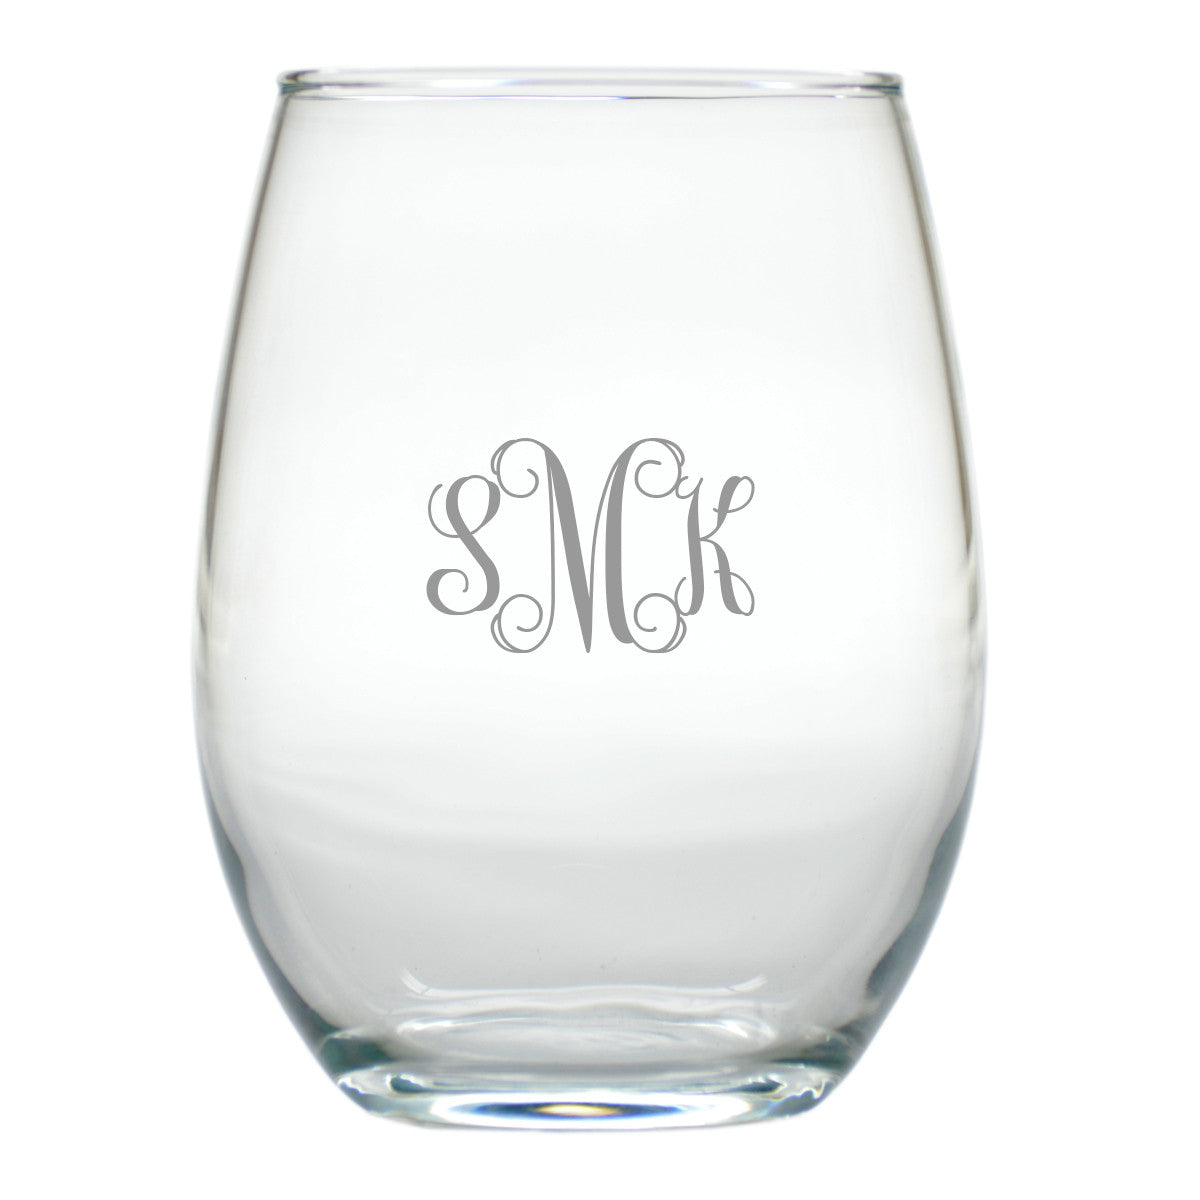 HomeWetBar Monogrammed Stemless Wine Glasses, Set of 4 (Personalized  Product)